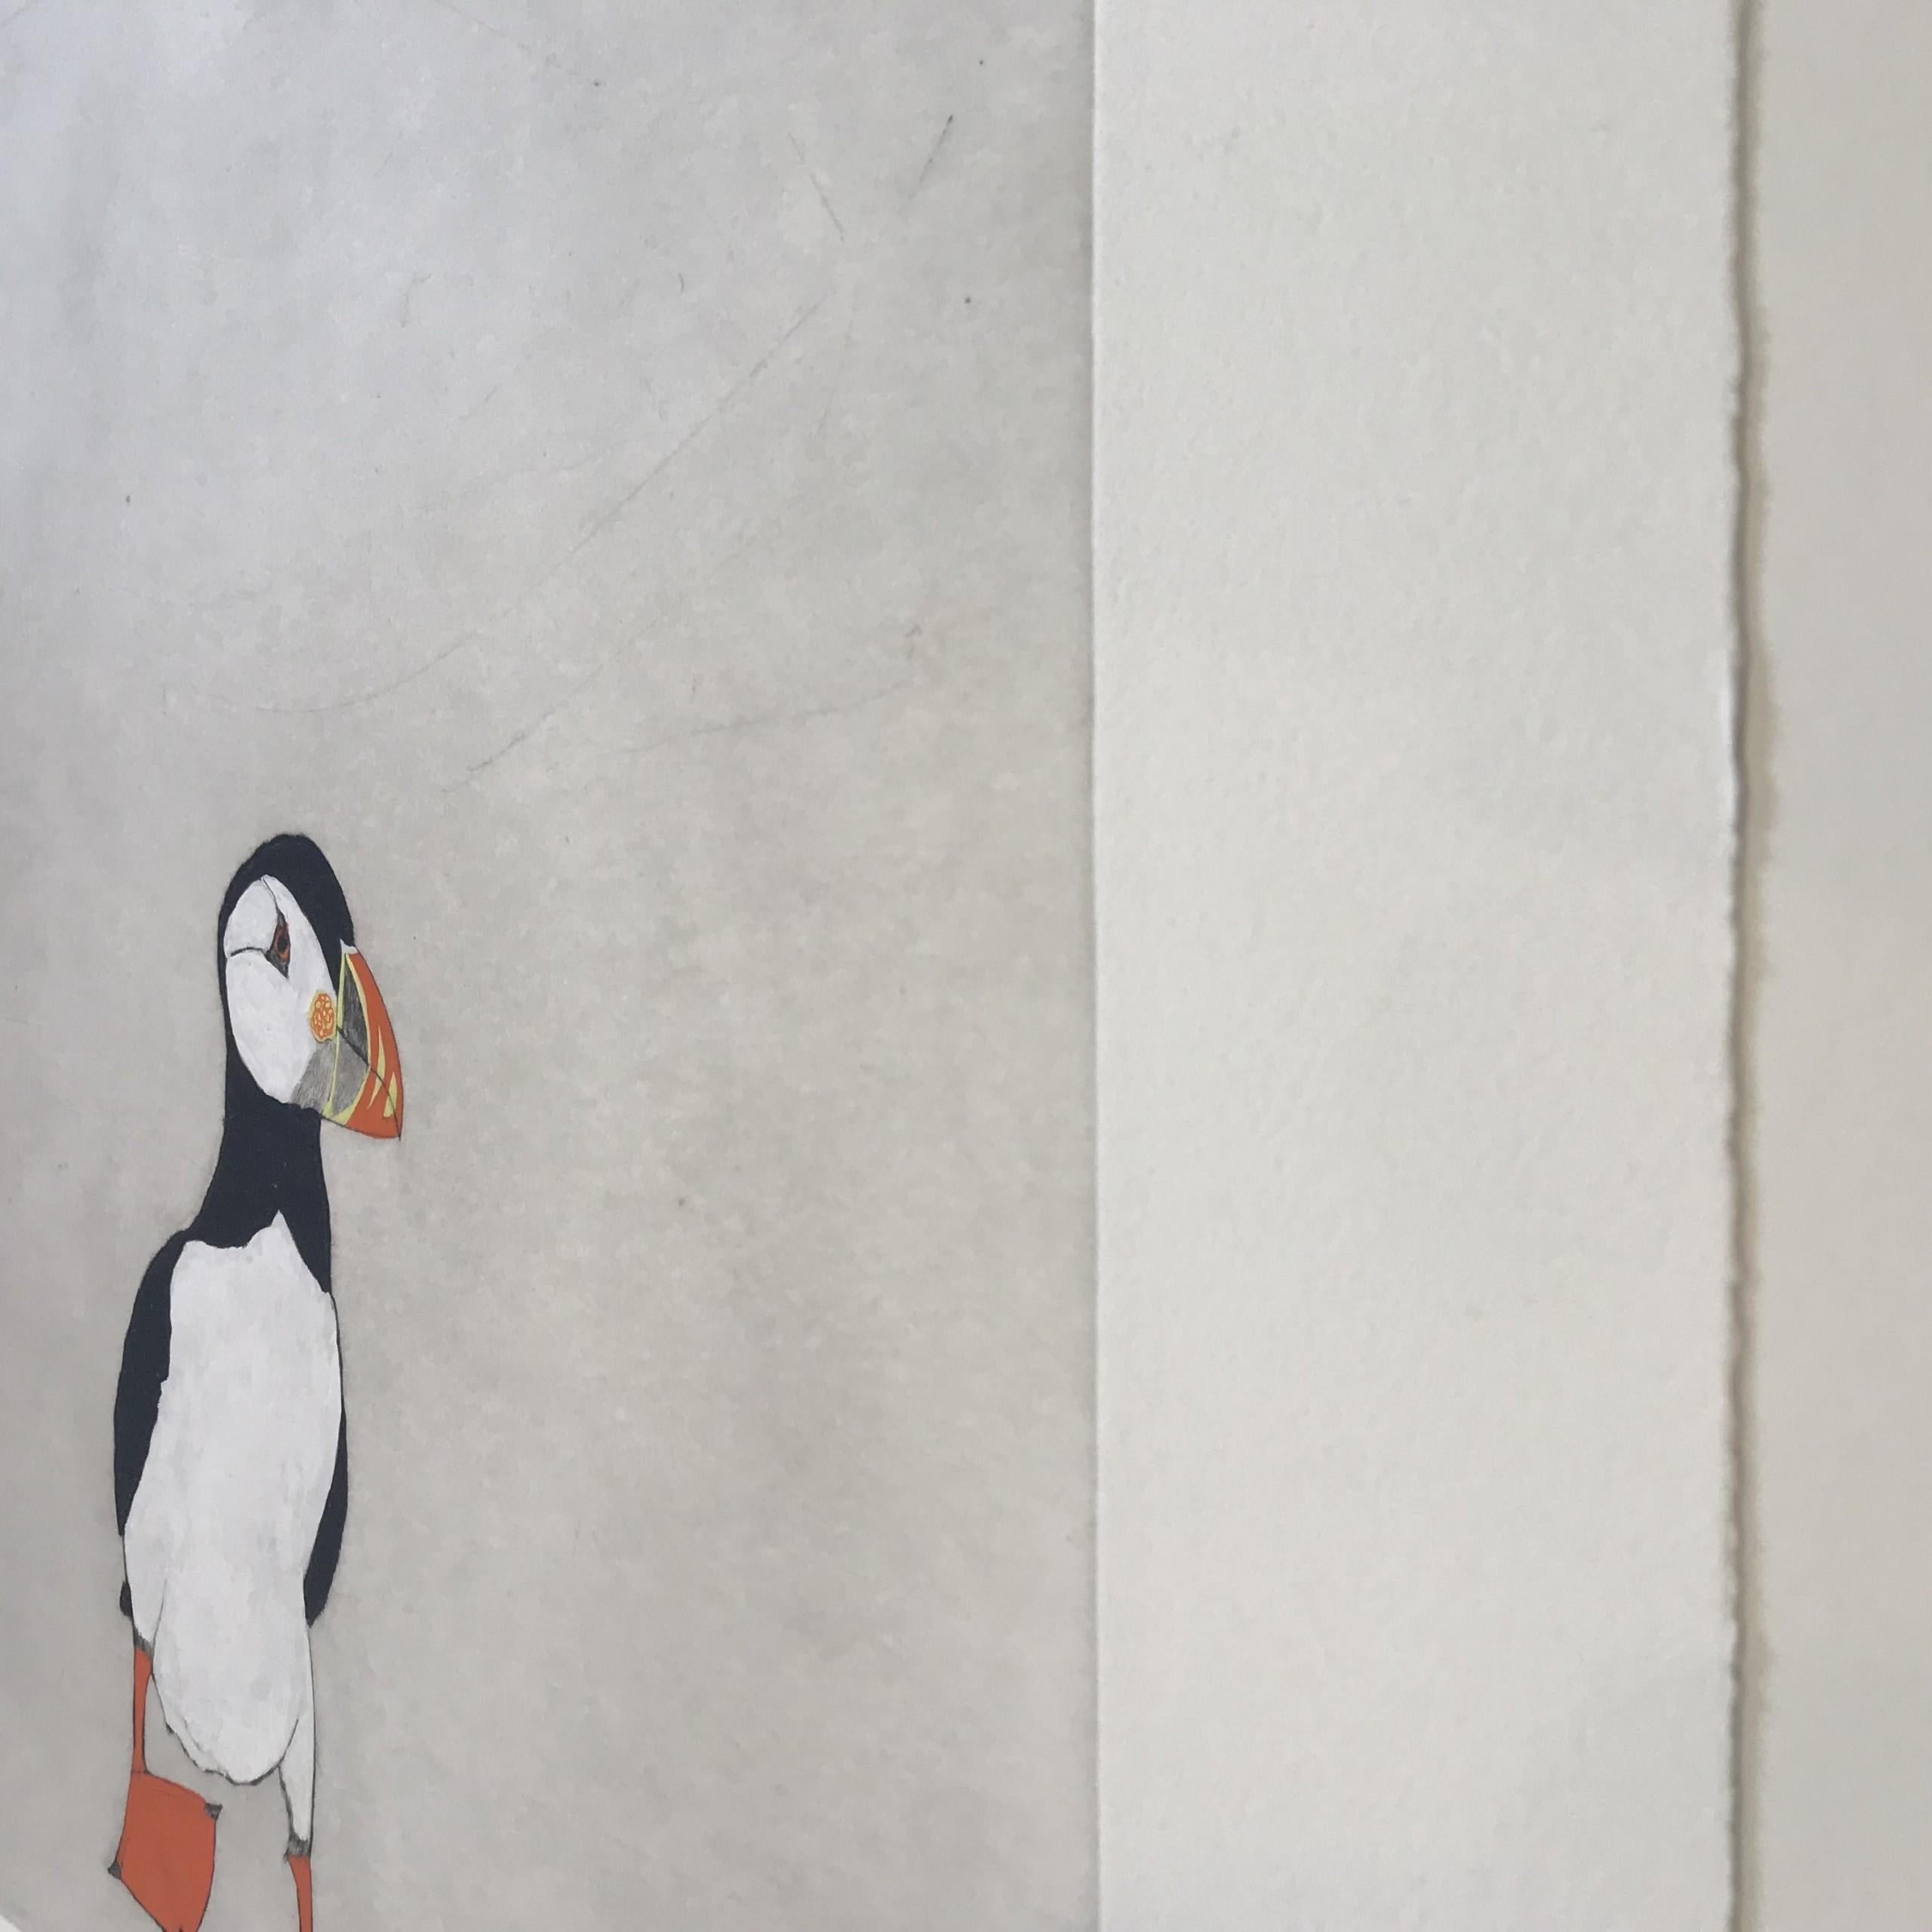 Puffin is a hand coloured limited edition drypoint etching with carborundum by artist and printmaker, Kate Boxer. Kate Boxer brings the vibrant colours of the puffin's beak to life in this drypoint print made with carborundum and finished with hand